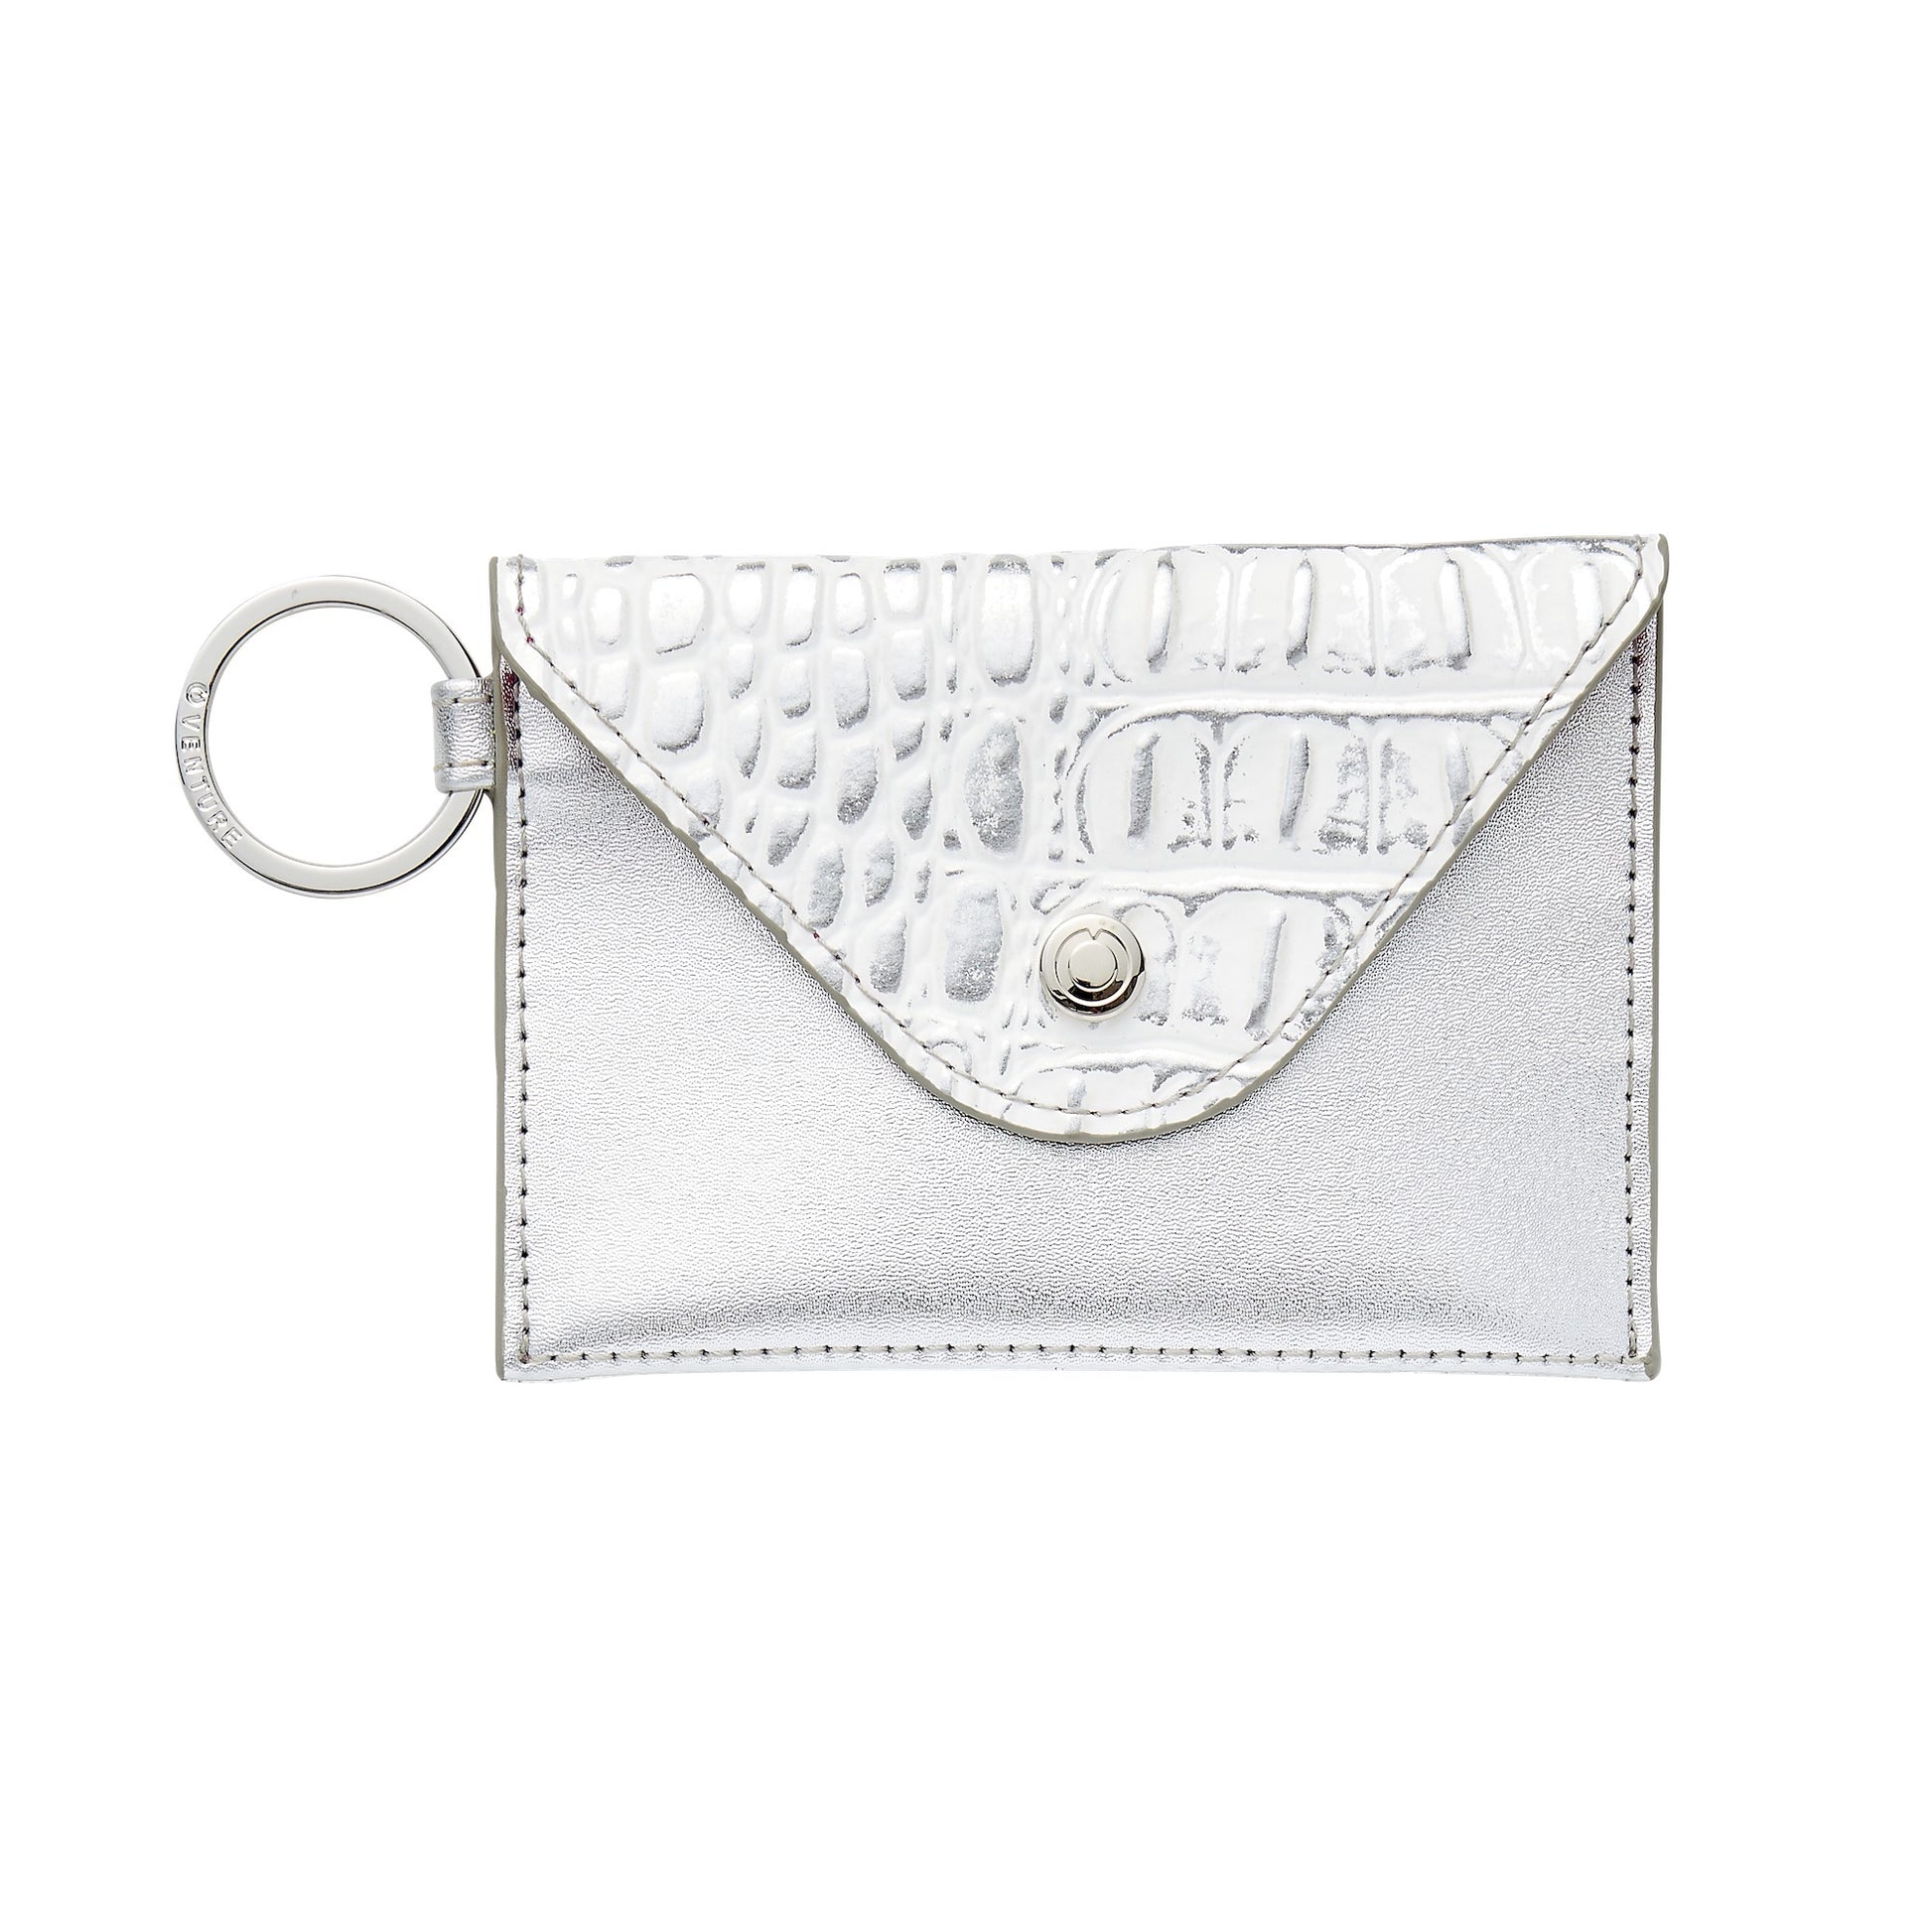 Leather Mini Envelope wallet in silver with croc embossed detail on the flap